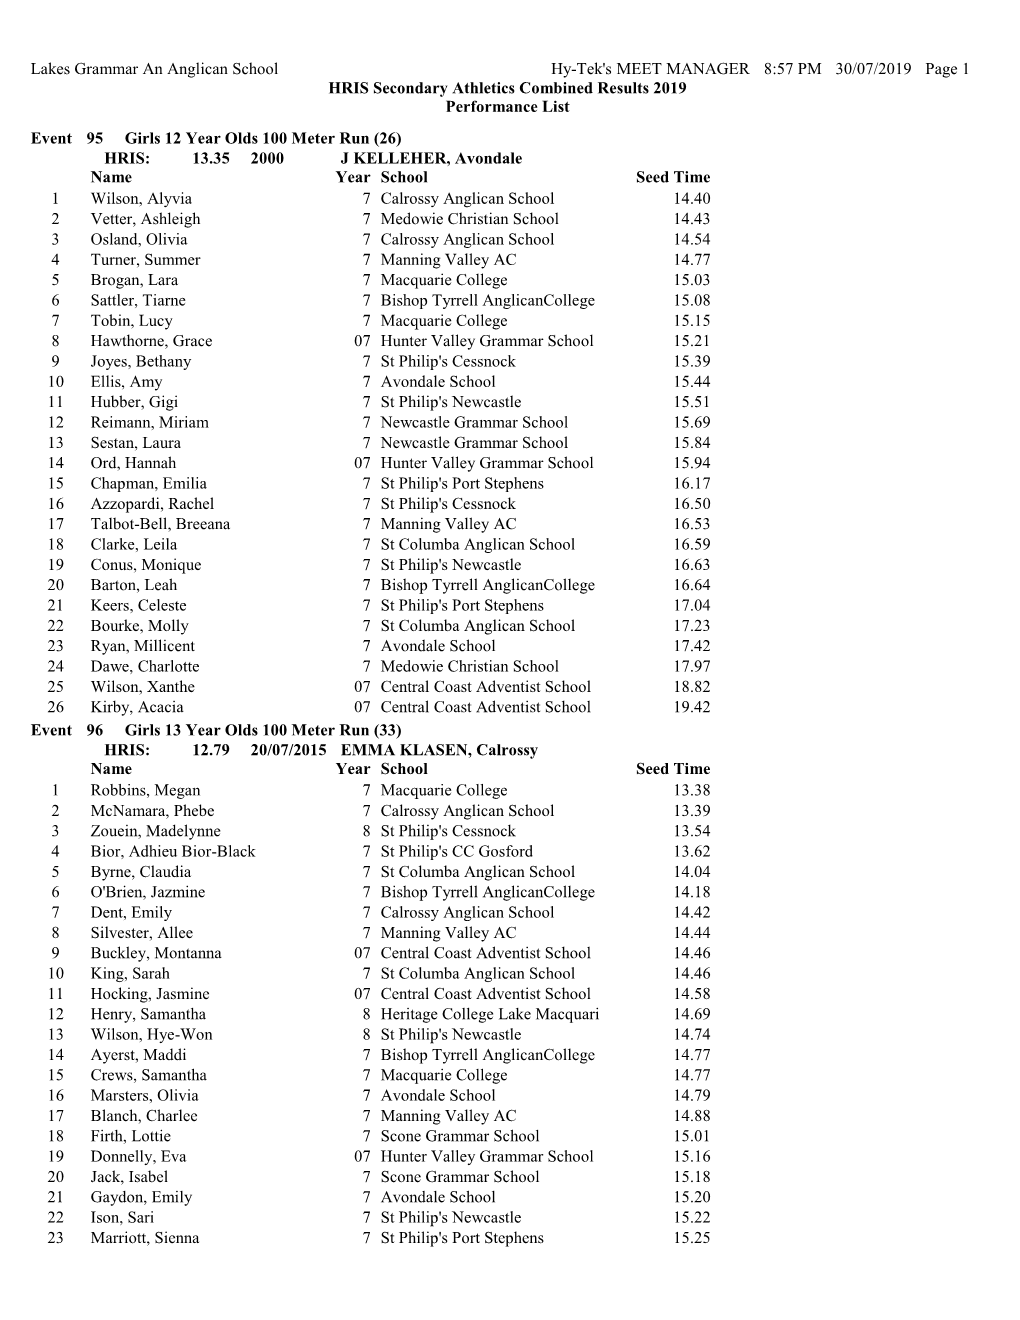 Lakes Grammar an Anglican School Hy-Tek's MEET MANAGER 8:57 PM 30/07/2019 Page 1 HRIS Secondary Athletics Combined Results 2019 Performance List